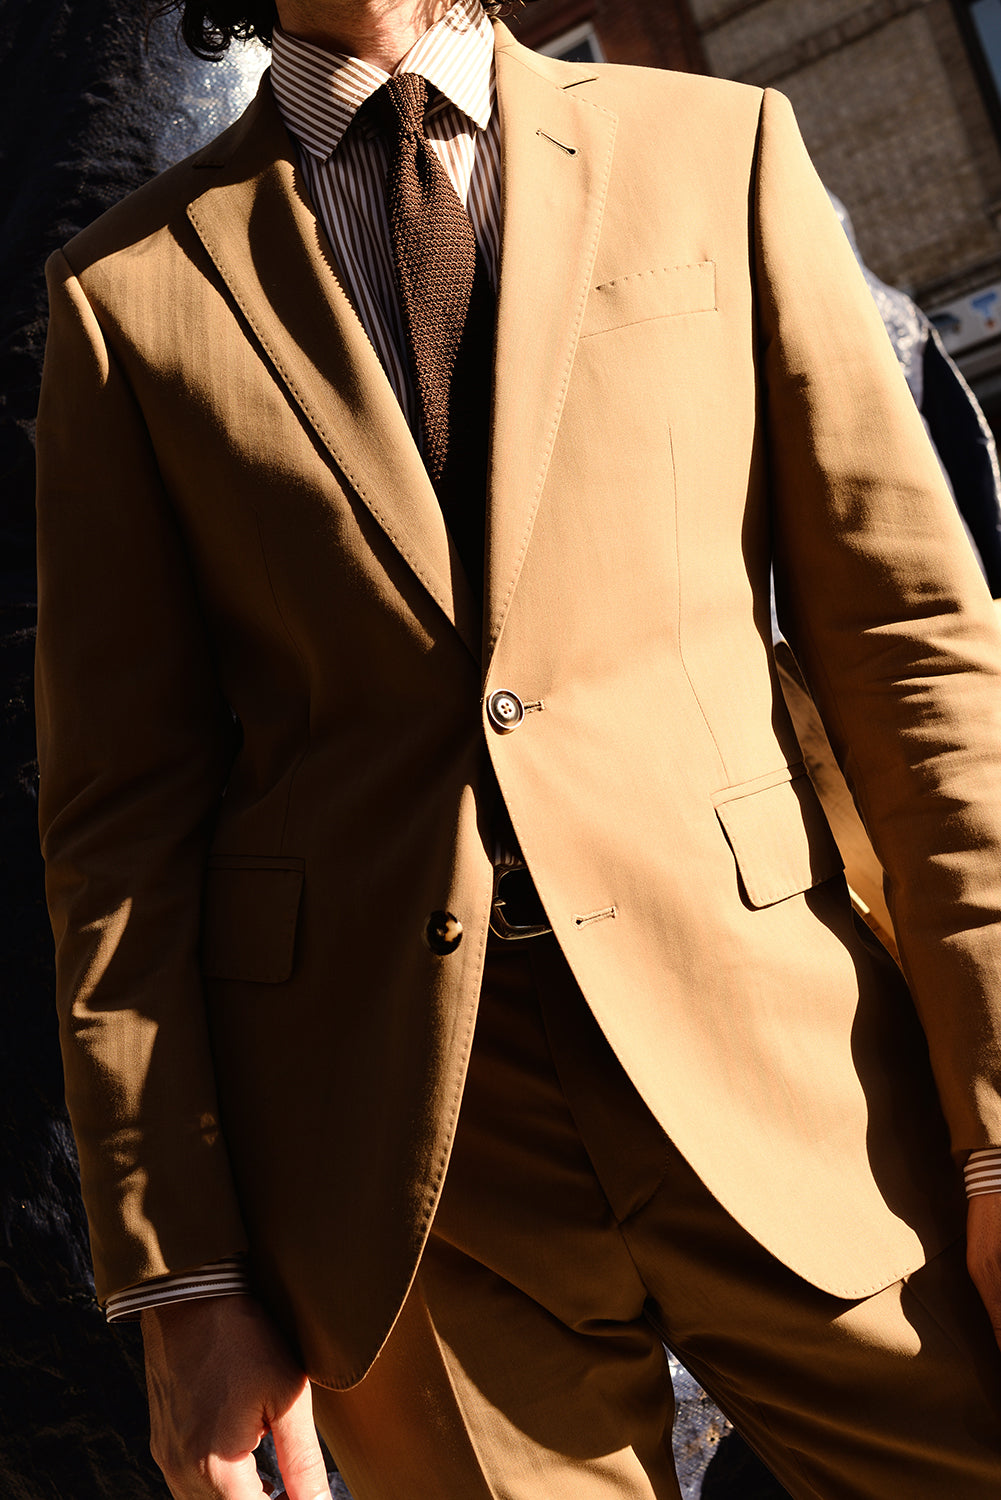 On-body shot of BKT50 Tailored Blazer in Herringbone Wool/Cotton - Tobacco. Model is wearing jacket with matching pant, striped dress shirt and knit tie